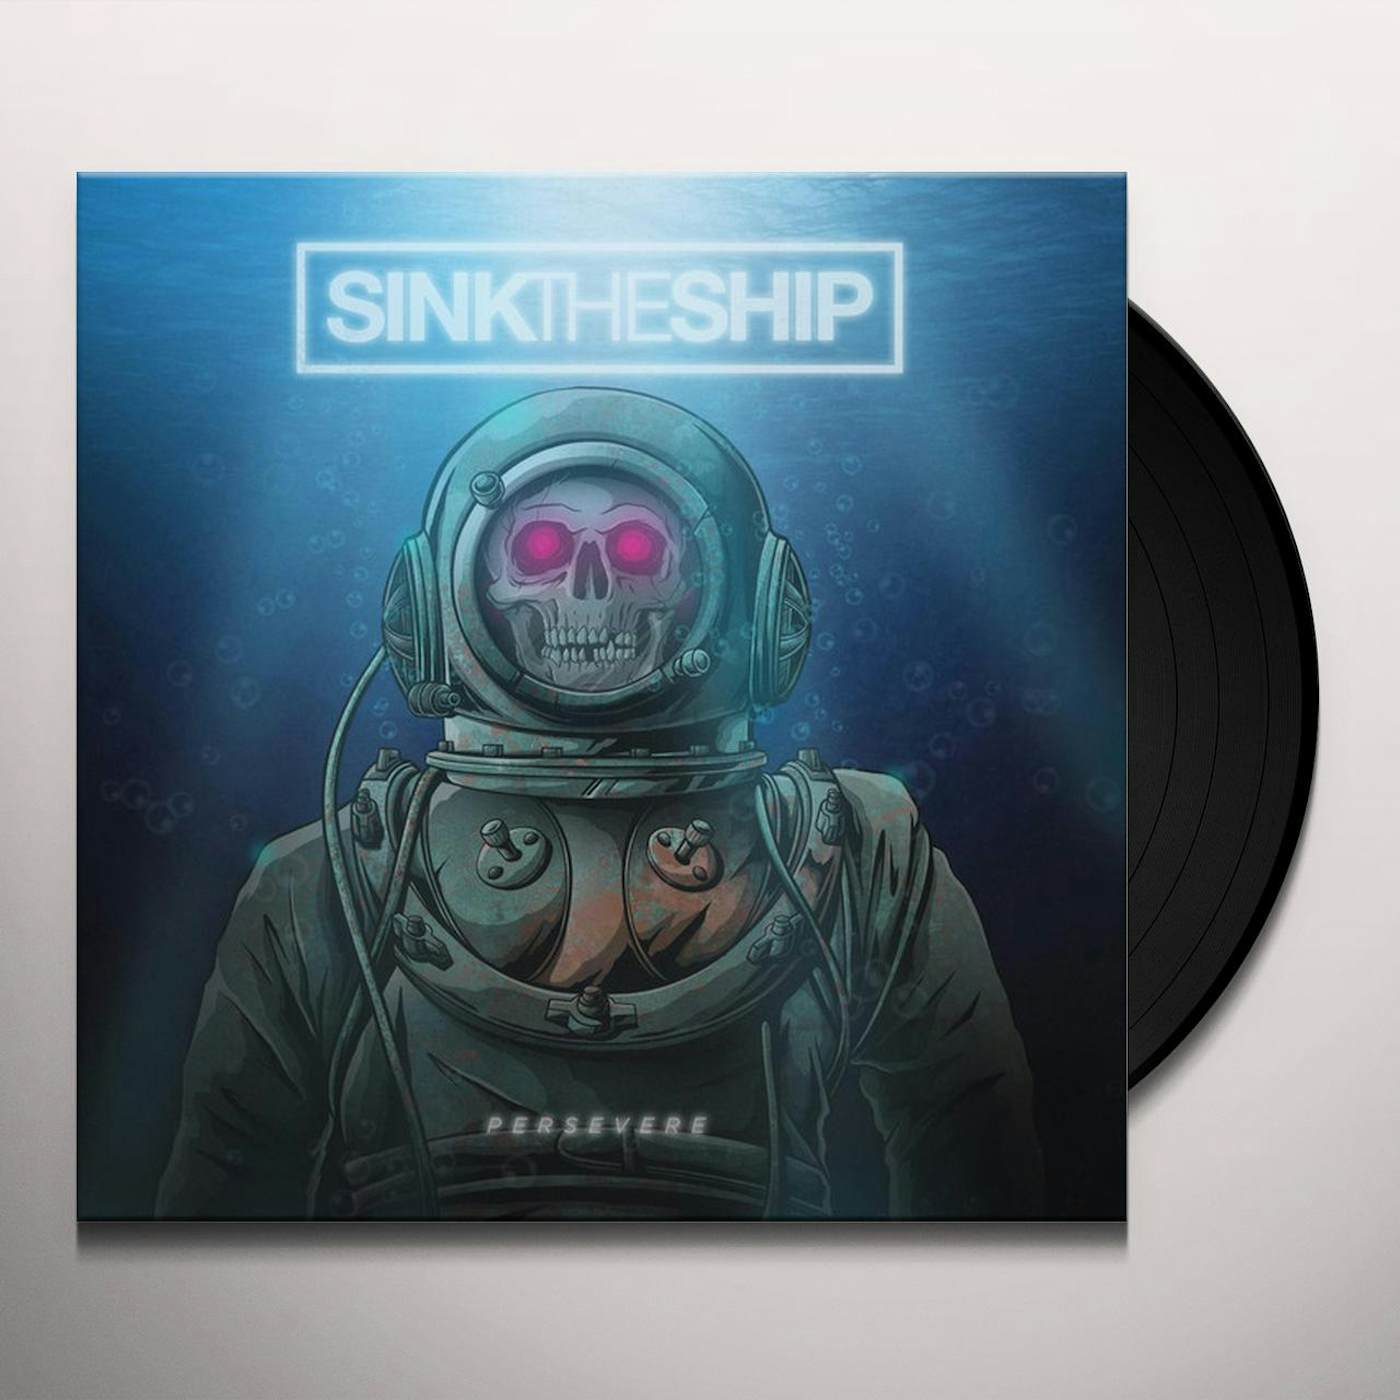 Sink The Ship Persevere Vinyl Record